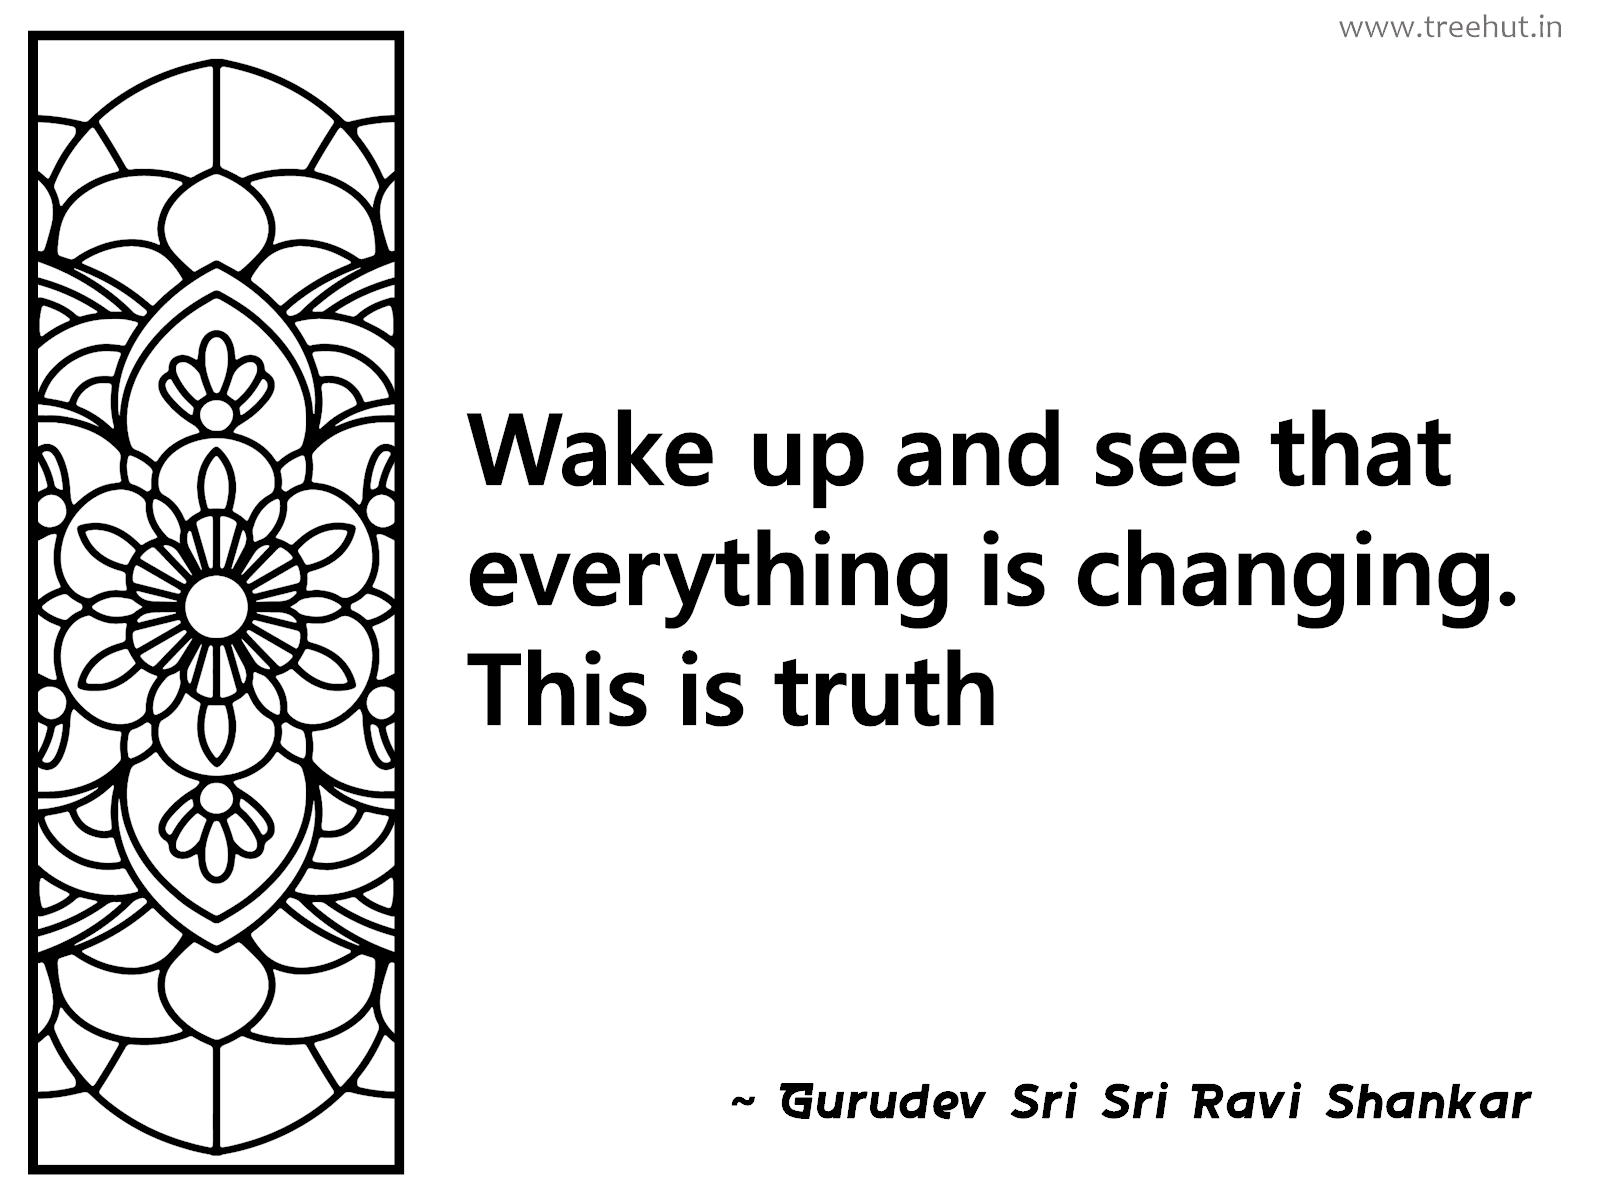 Wake up and see that everything is changing. This is truth Inspirational Quote by Gurudev Sri Sri Ravi Shankar, coloring pages